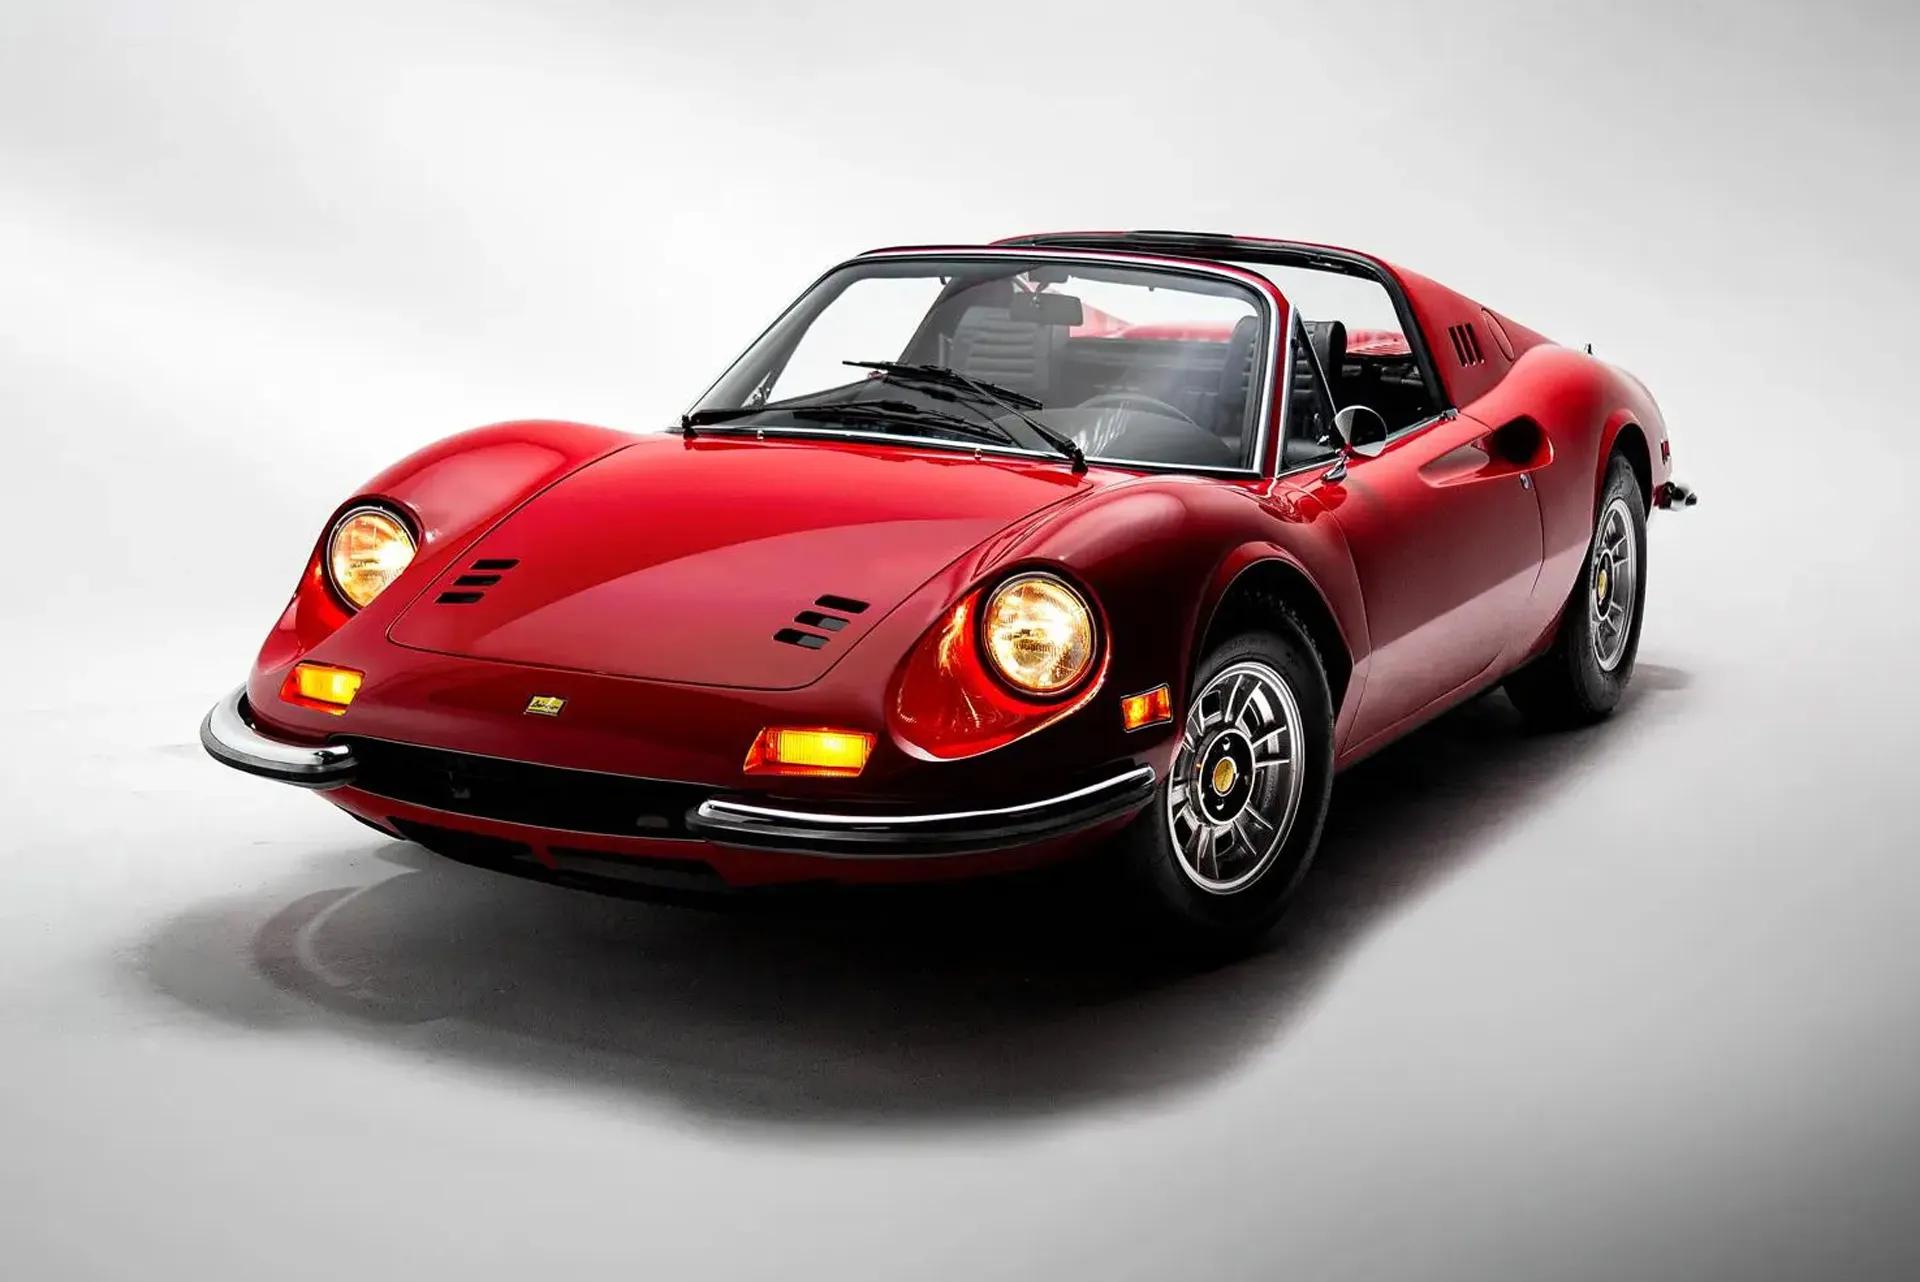 Ferrari Dino once owned by Cher up for sale [Video]